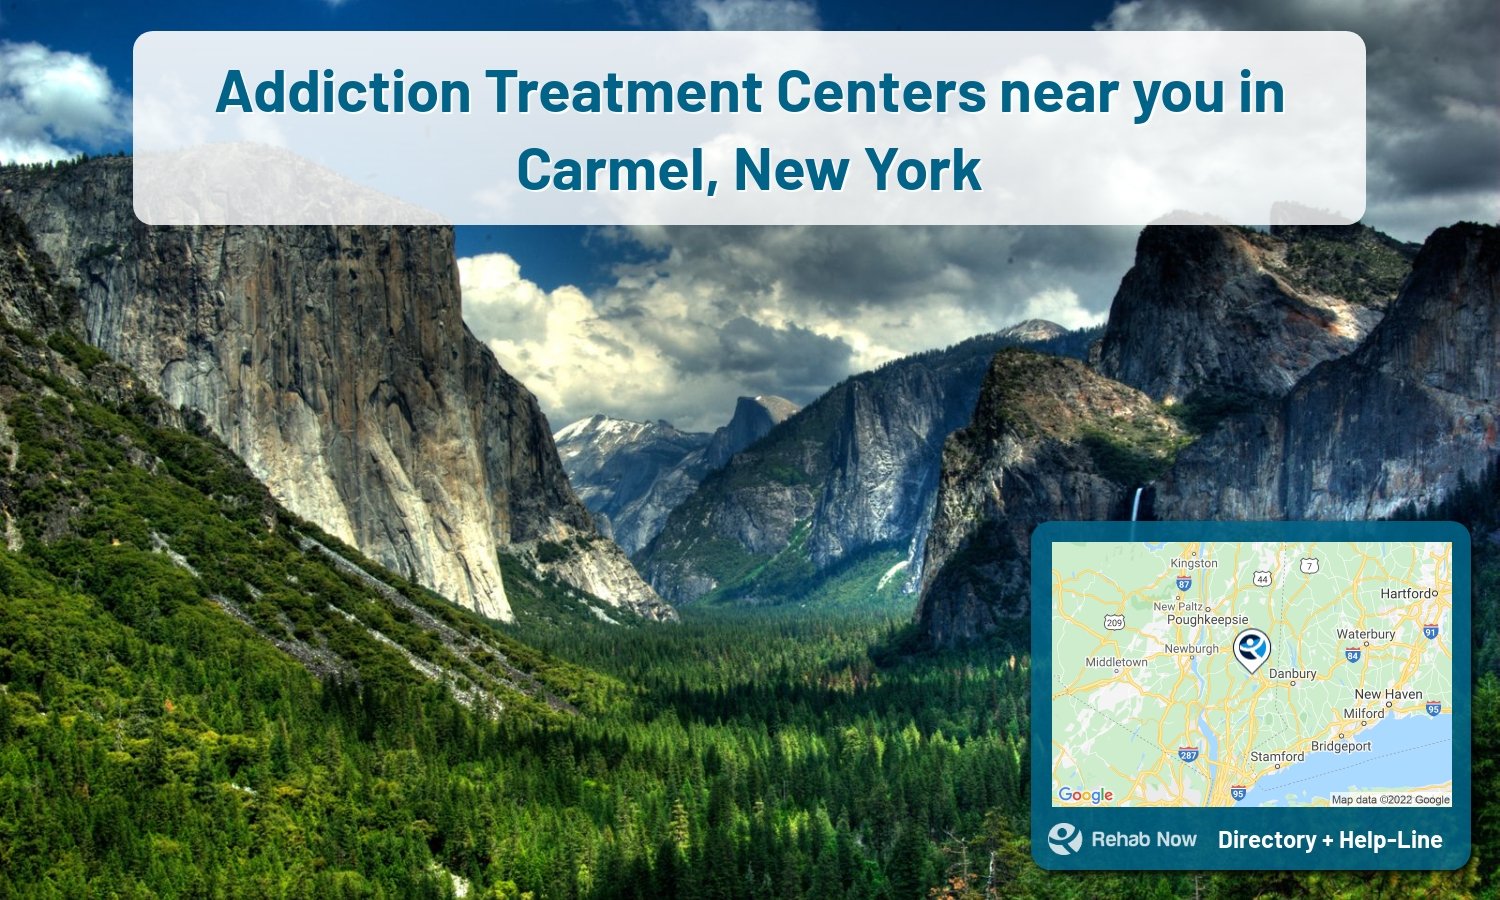 Carmel, NY Treatment Centers. Find drug rehab in Carmel, New York, or detox and treatment programs. Get the right help now!